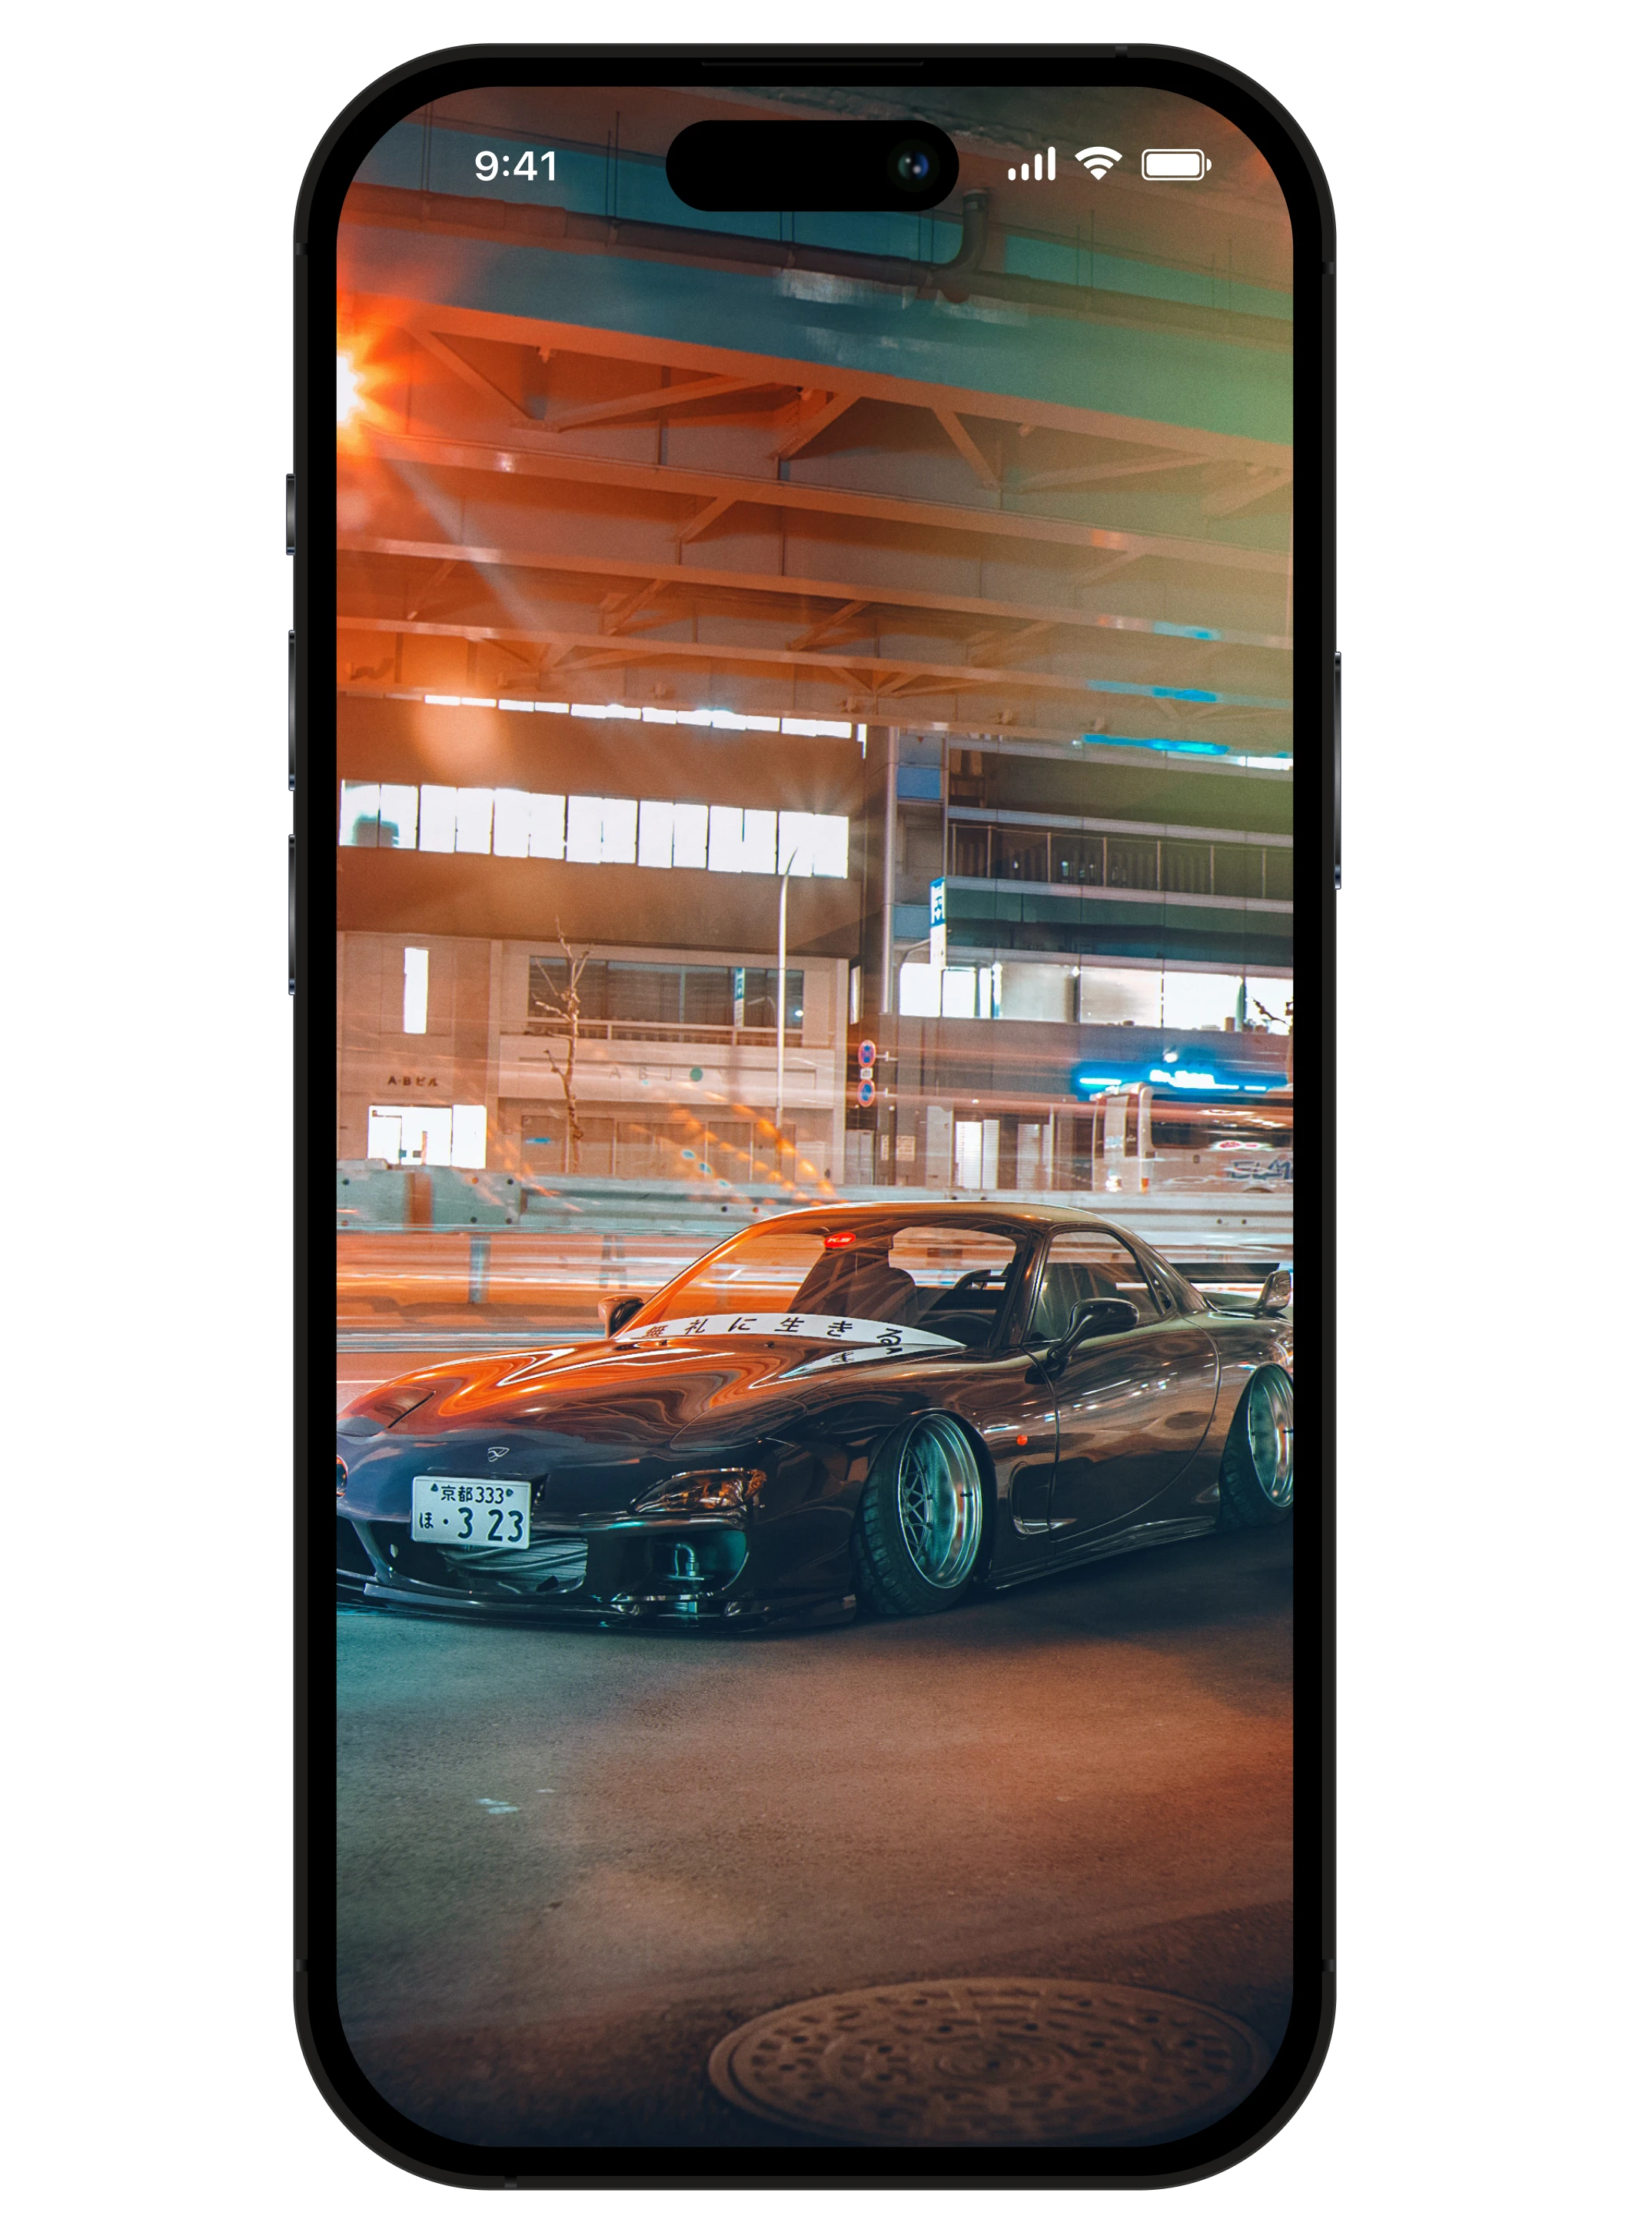 Back To The Future Mazda Rx7 Moon Digital Art 4k S... iPhone Wallpapers  Free Download